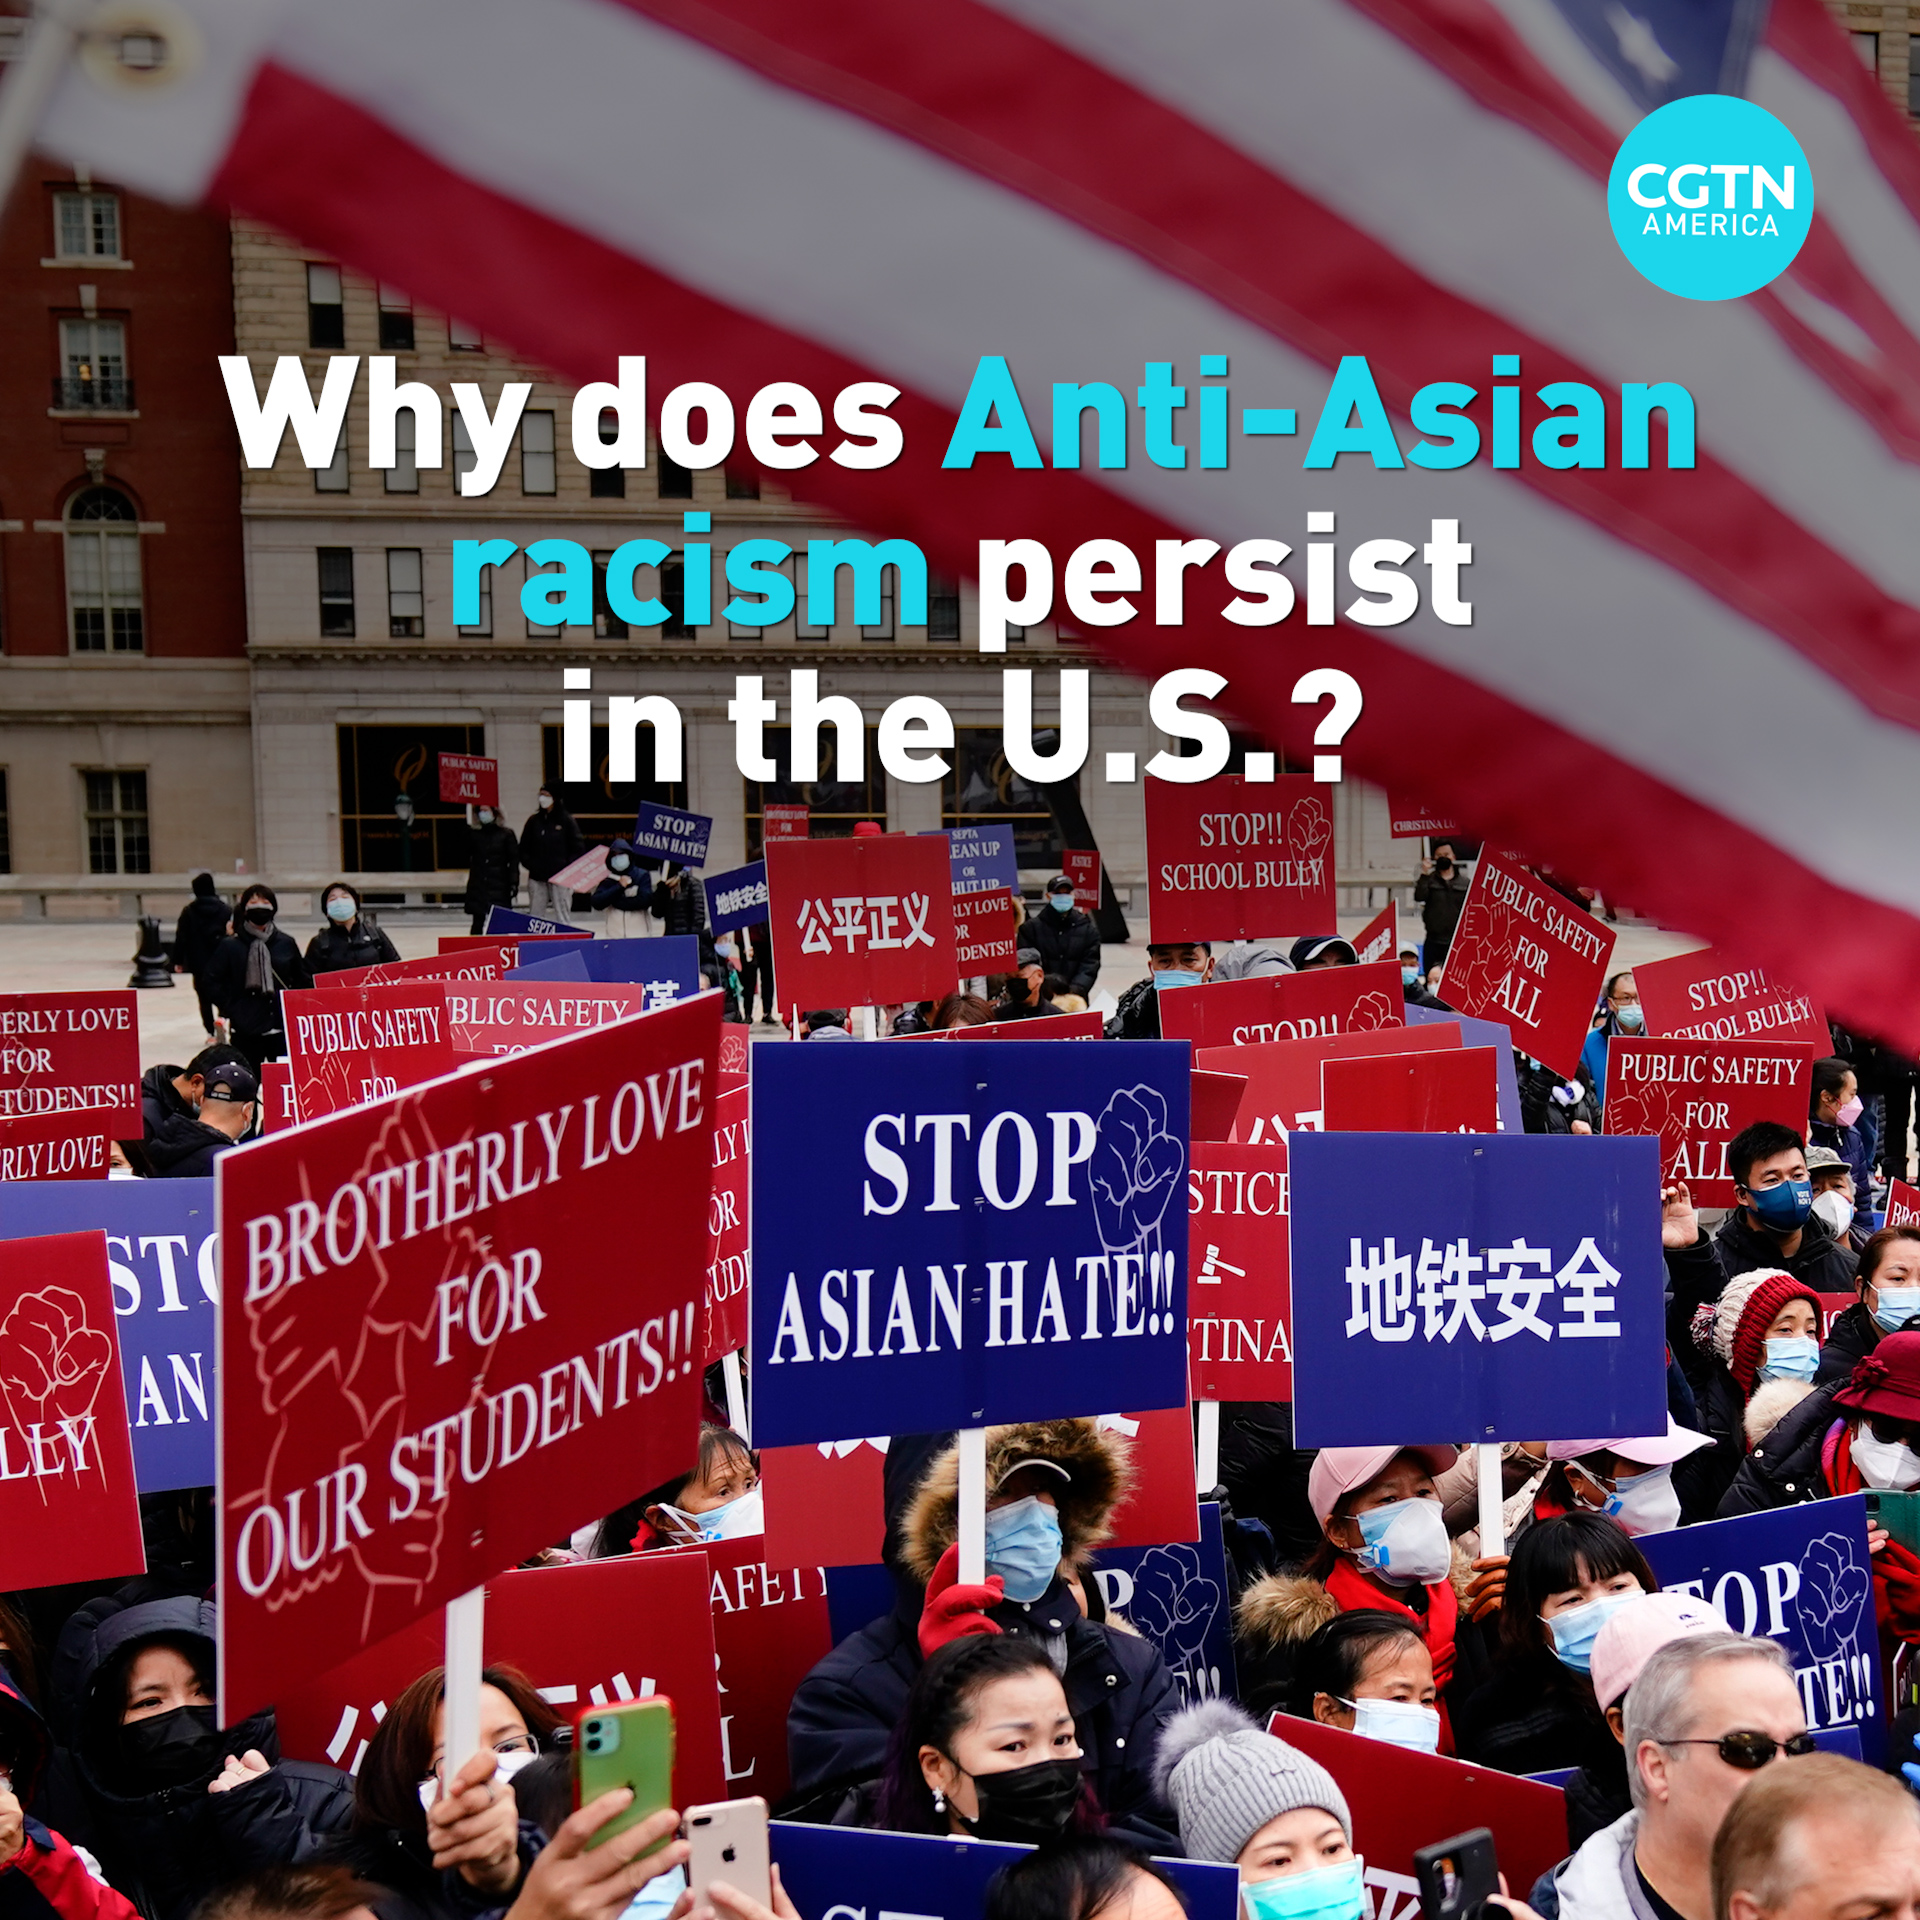 Addressing Anti-Asian racism and inequity in the U.S.